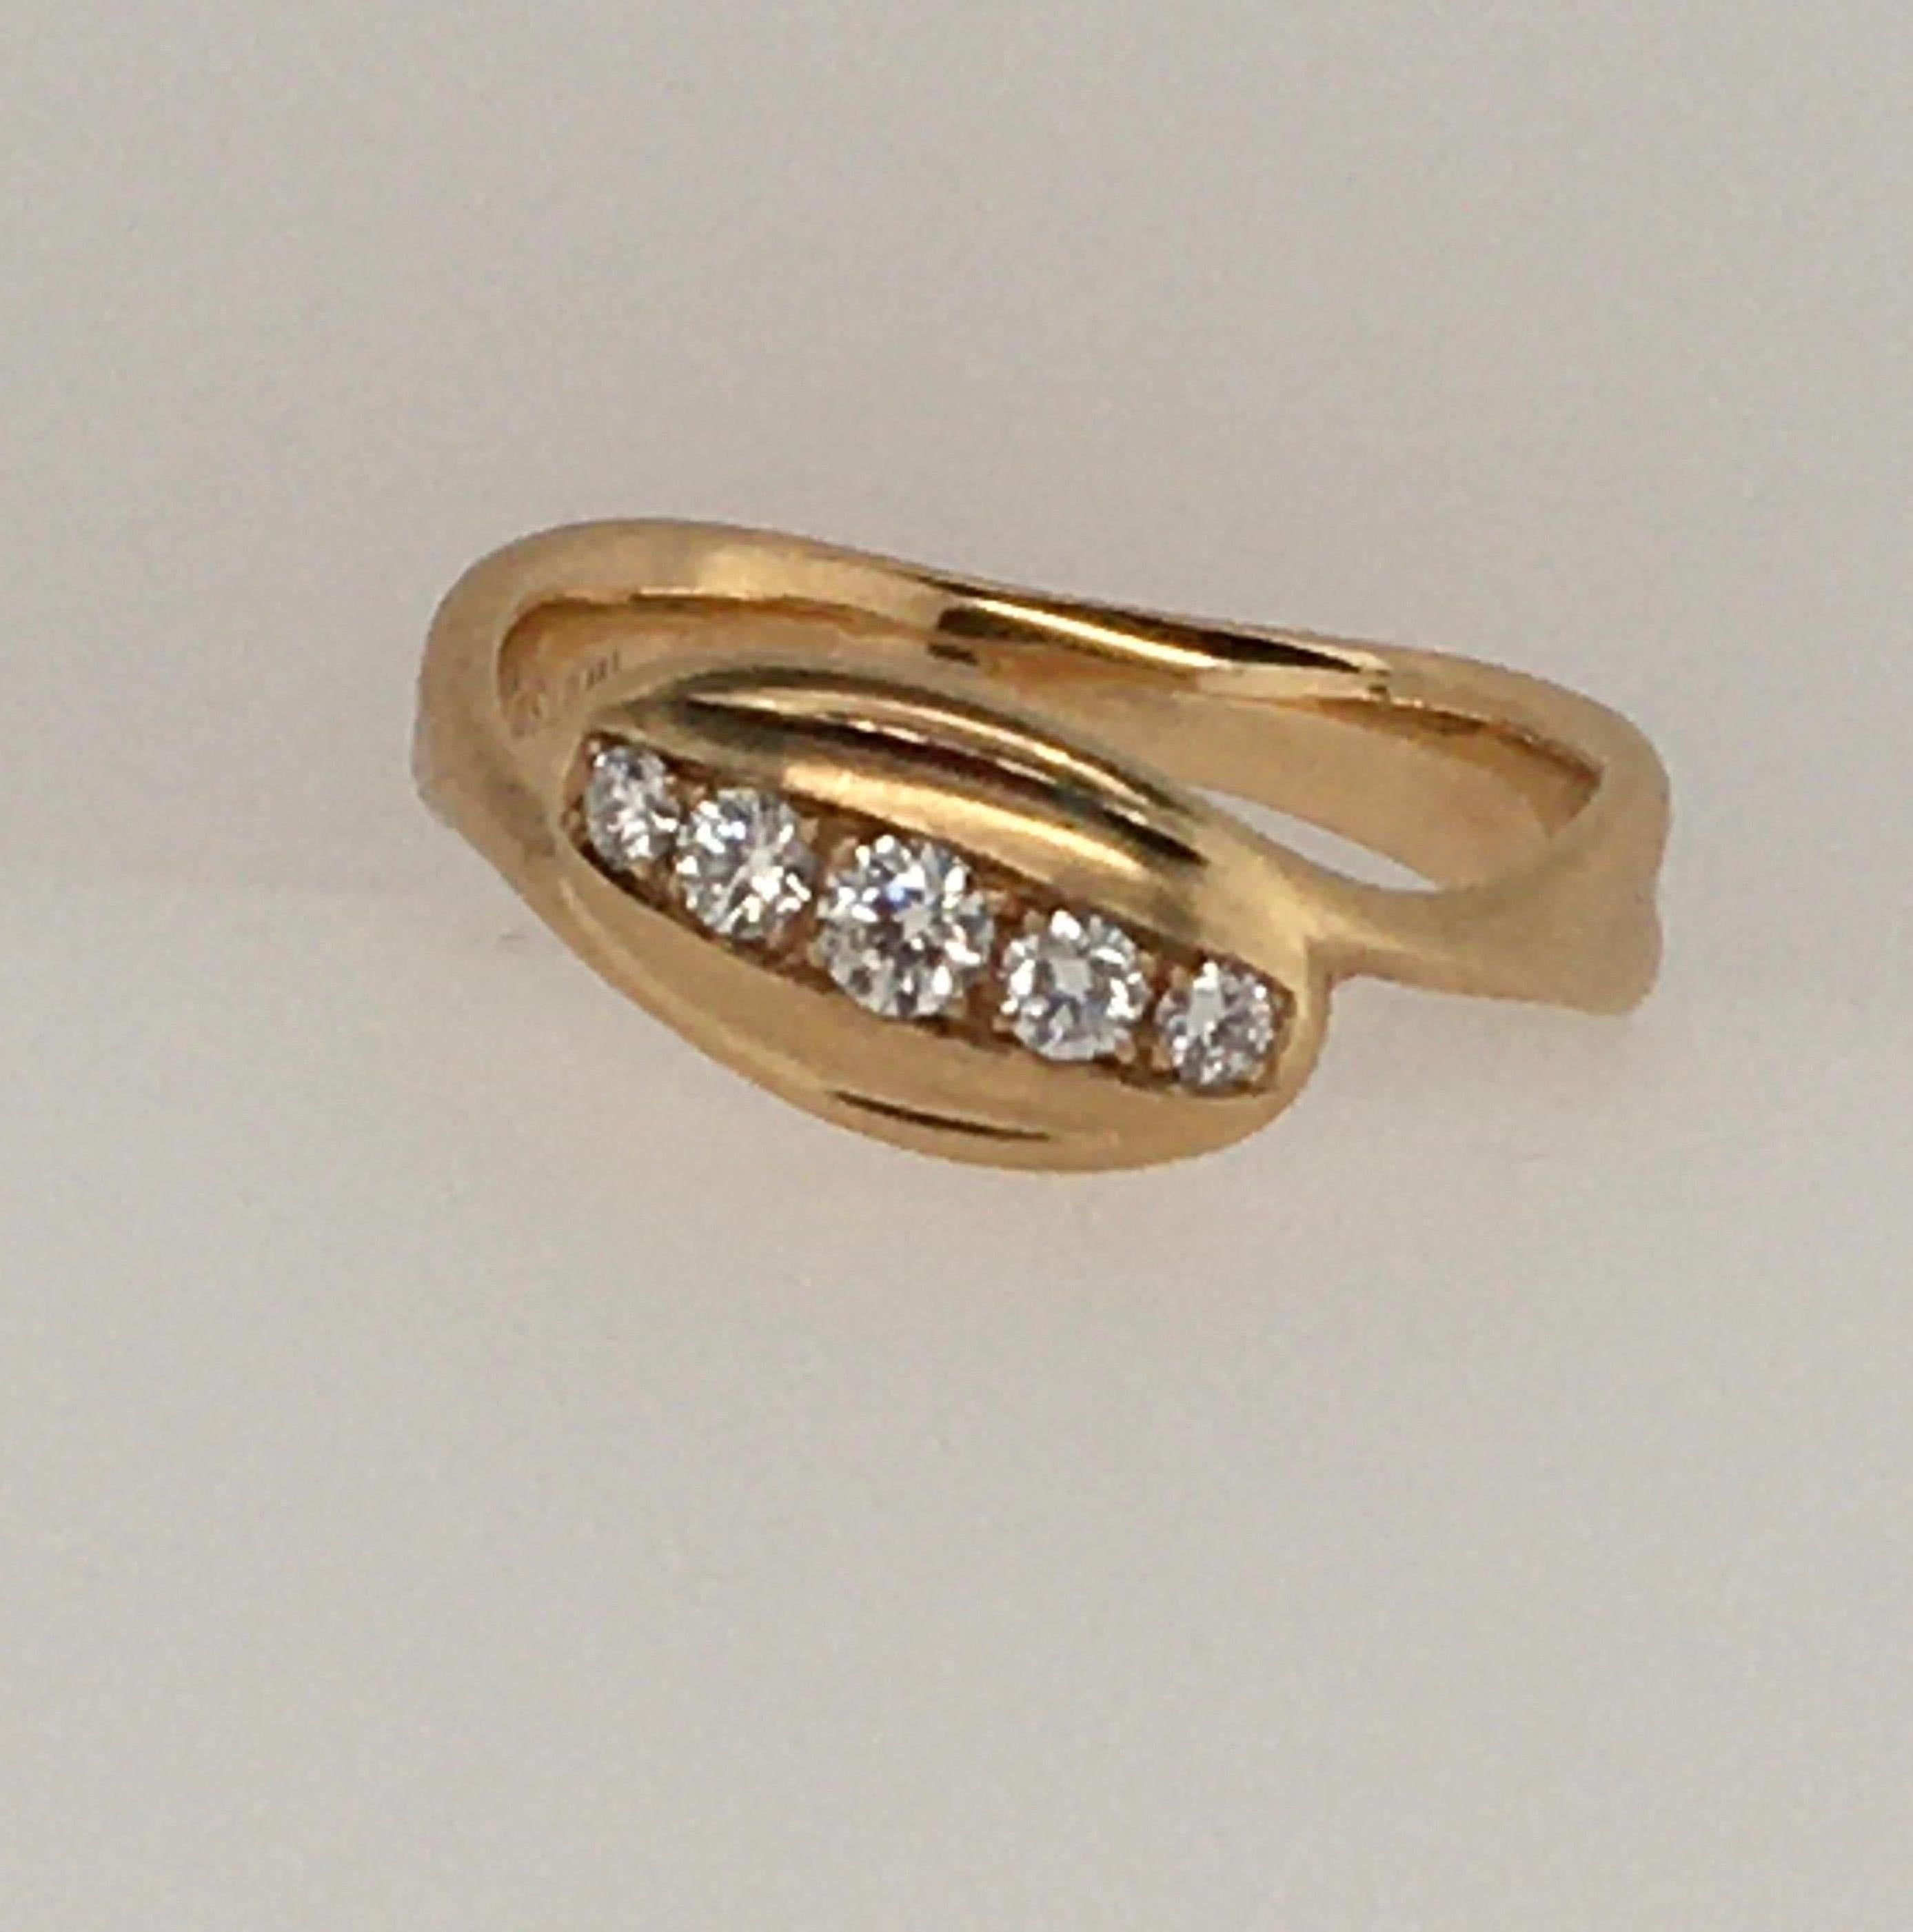 A beautiful example of Jennifer Shigetomi's distinctive style, this 14K yellow gold stylized satin finish ring features 5 embedded diamonds with a TCW of .22.   F, G Color , Vs1.    Interior imprint reads 